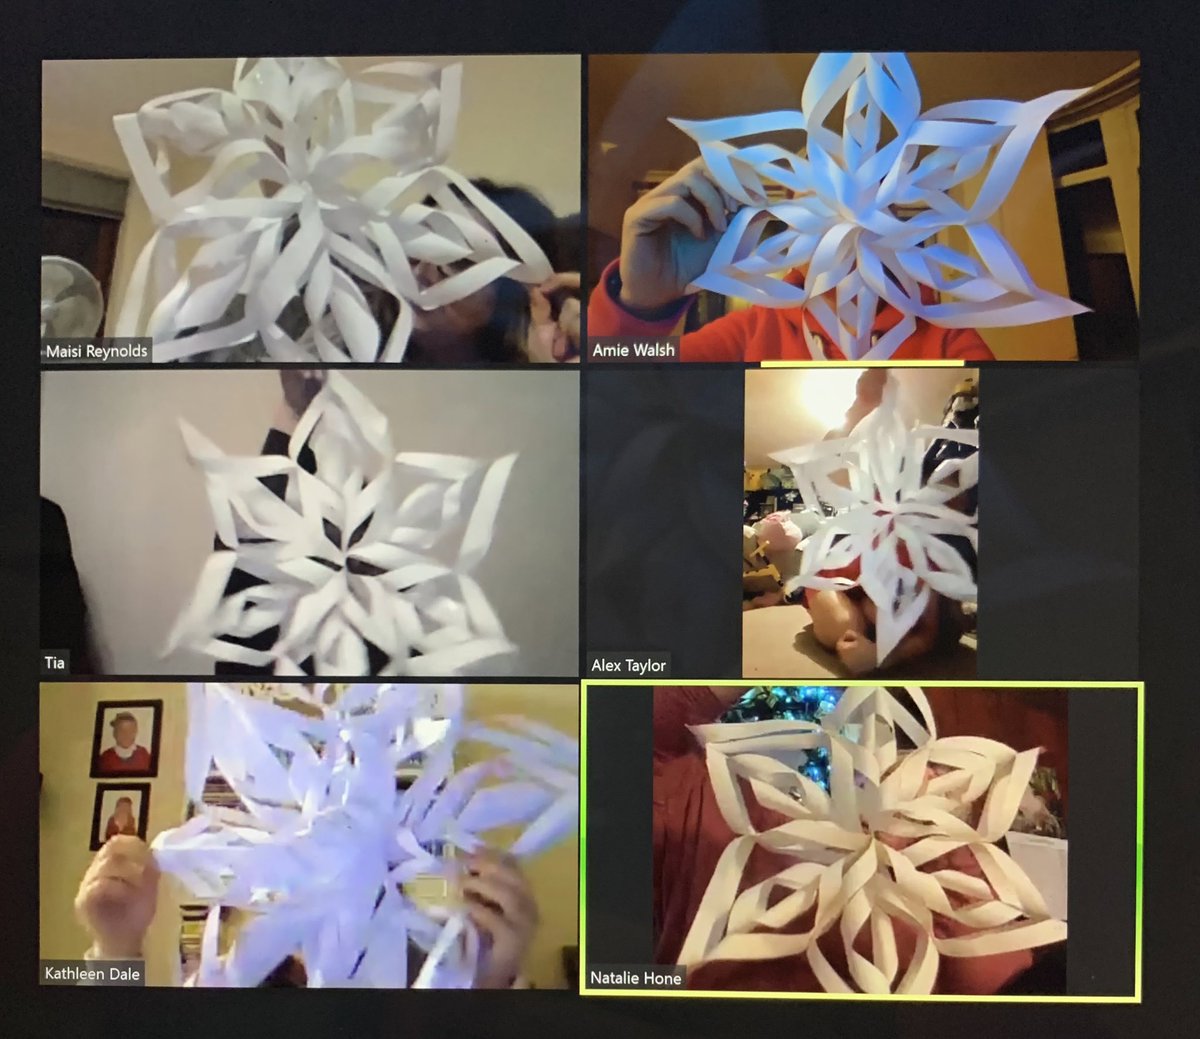 1st Northfleet Guides started their Christmas activities during their virtual meeting this week ❄️ ❄️ 

#virtualguiding #girlguides #zoom #christmascraft #Zoom #snowflake